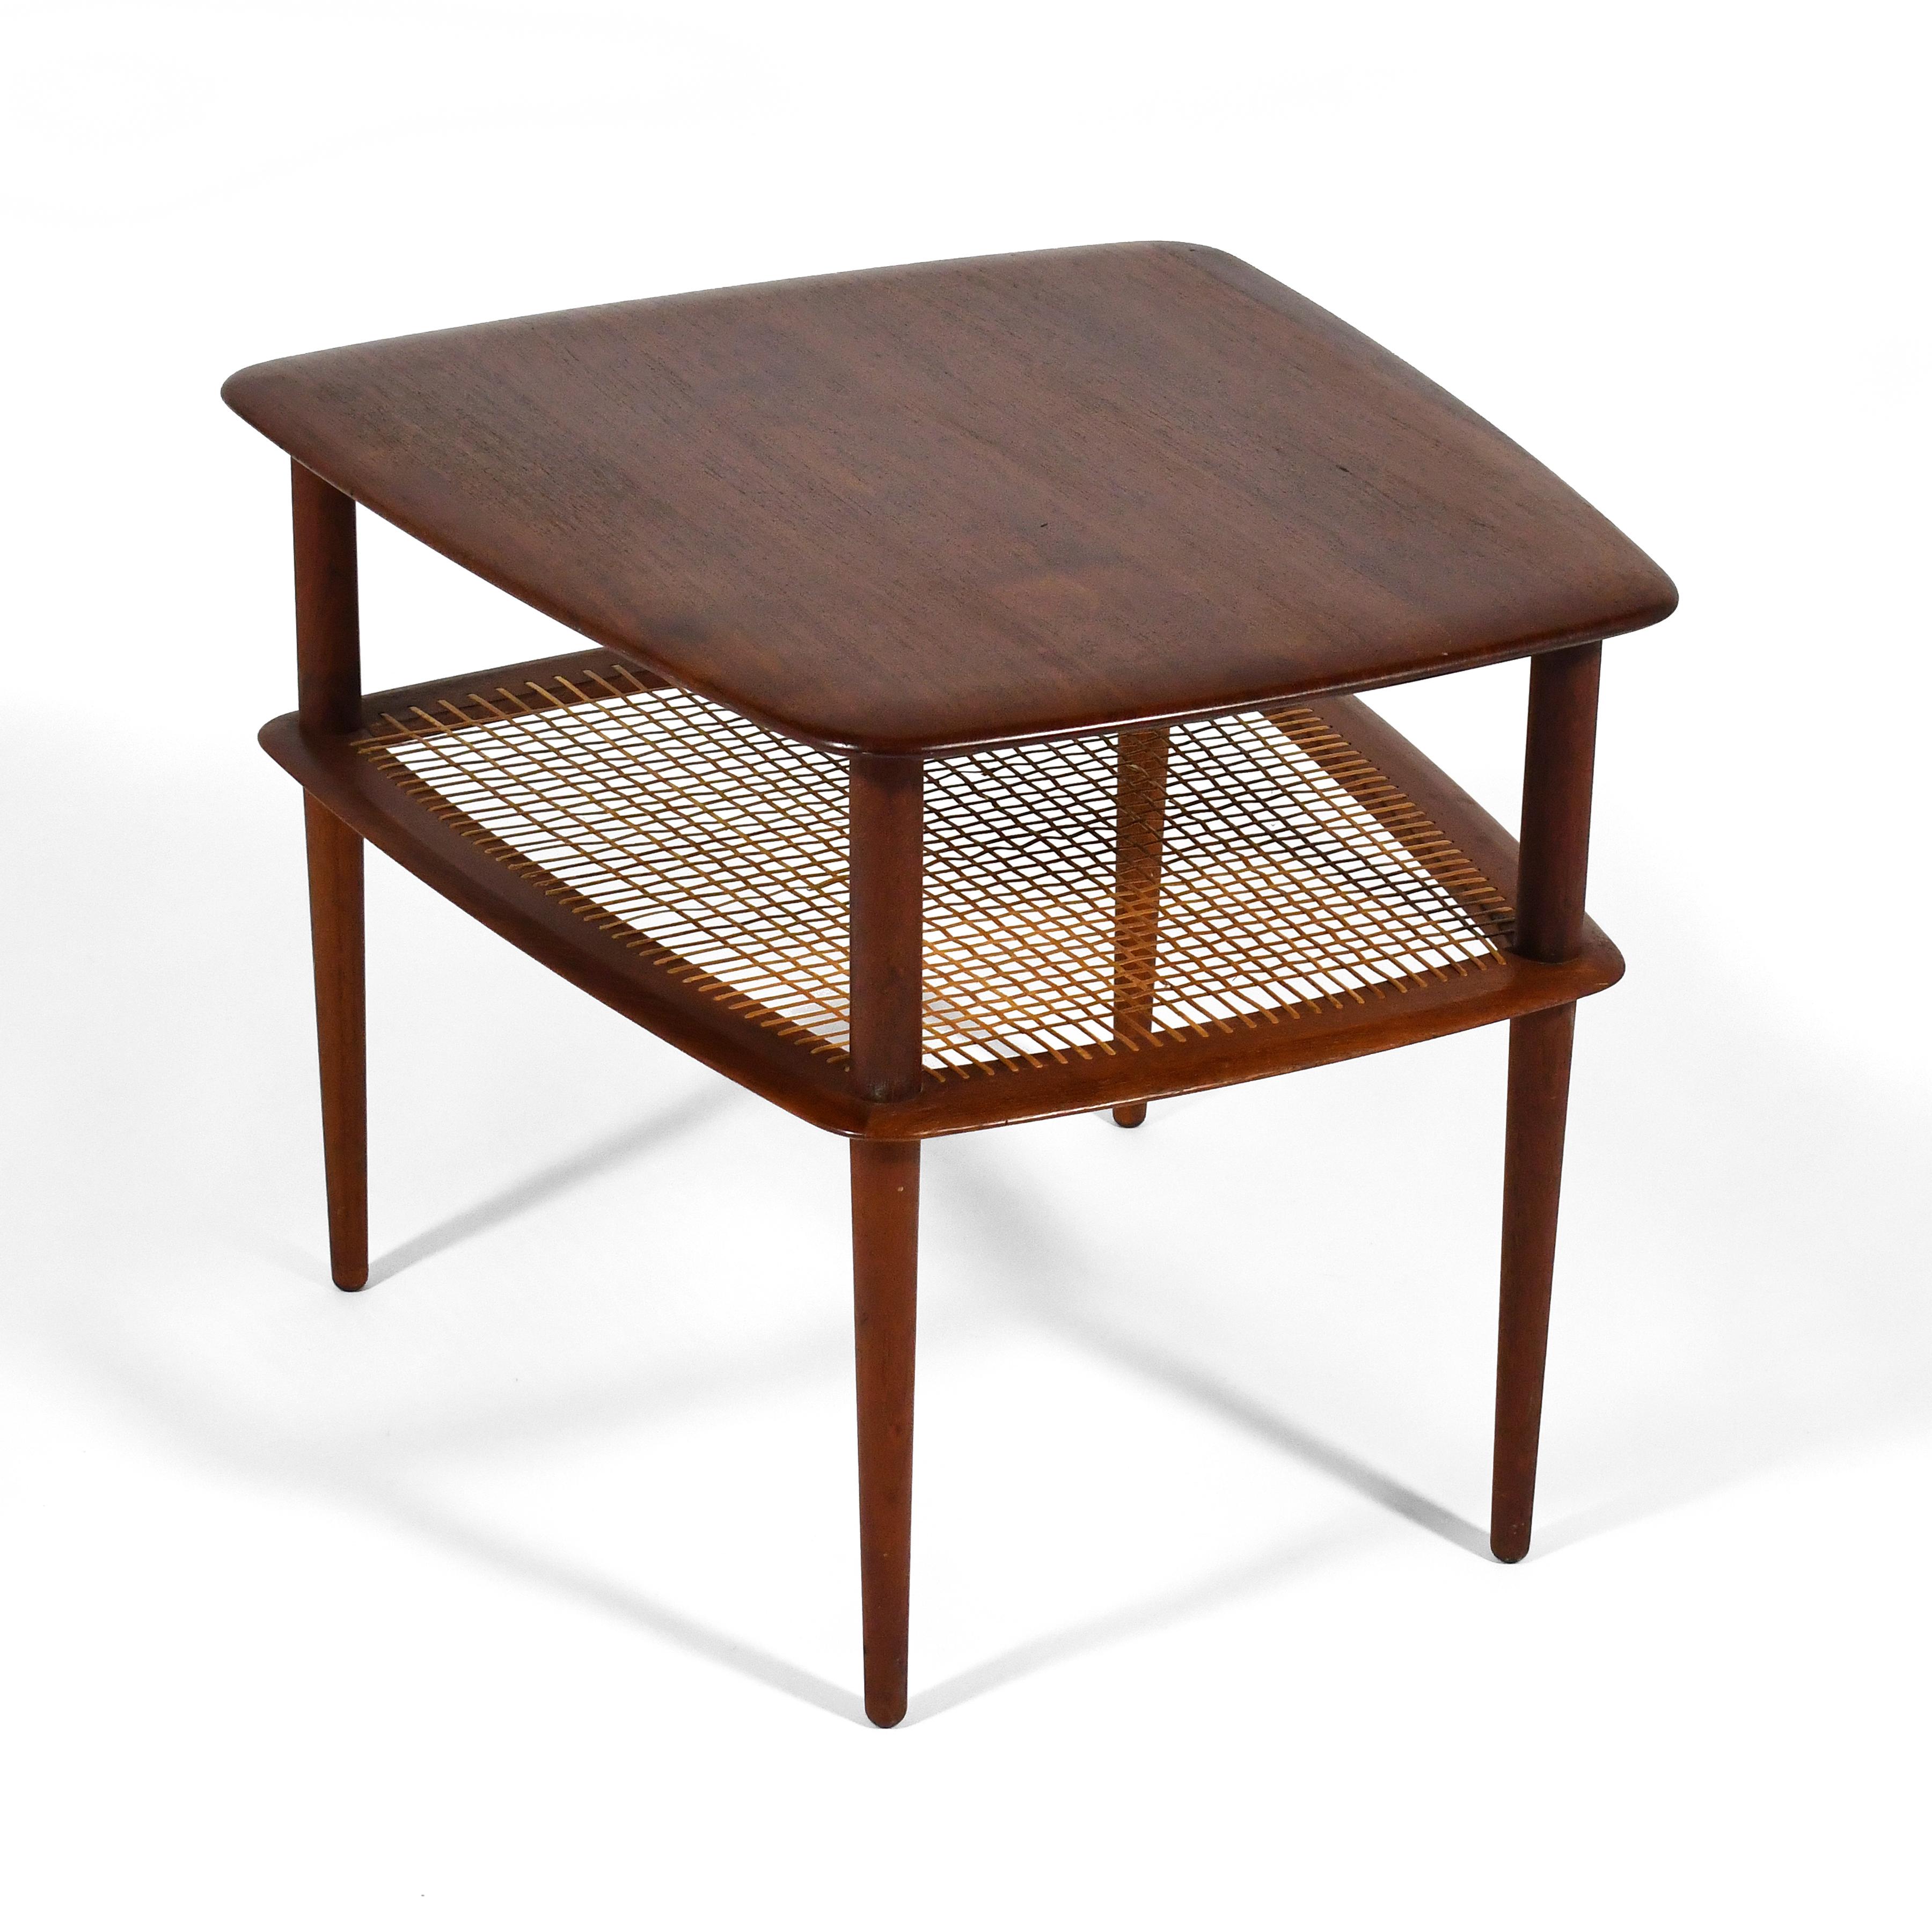 This Peter Hvidt & Orla Mølgaard-Nielsen model FD 521 side table from 1956 designed for France & Daverkosen features all solid teak construction and a cane lower shelf.